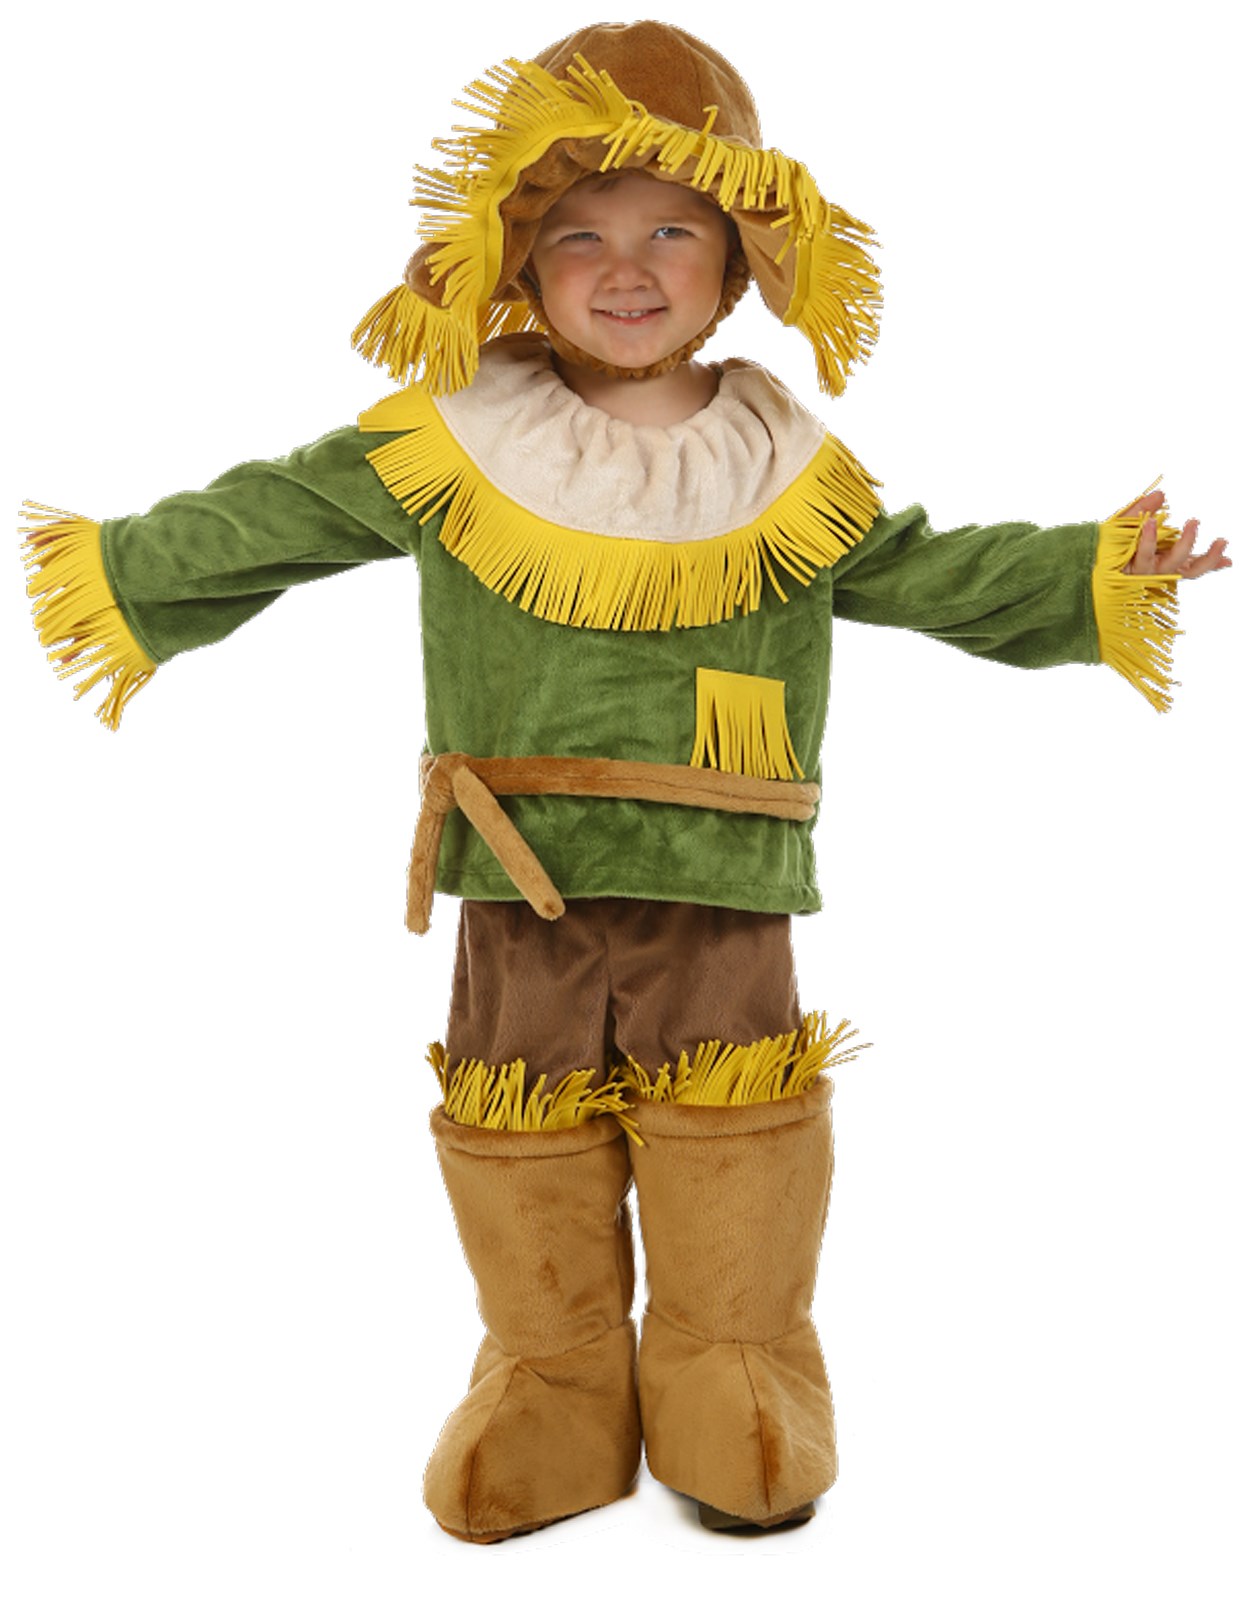 The Wizard of Oz Scarecrow Kids Costume